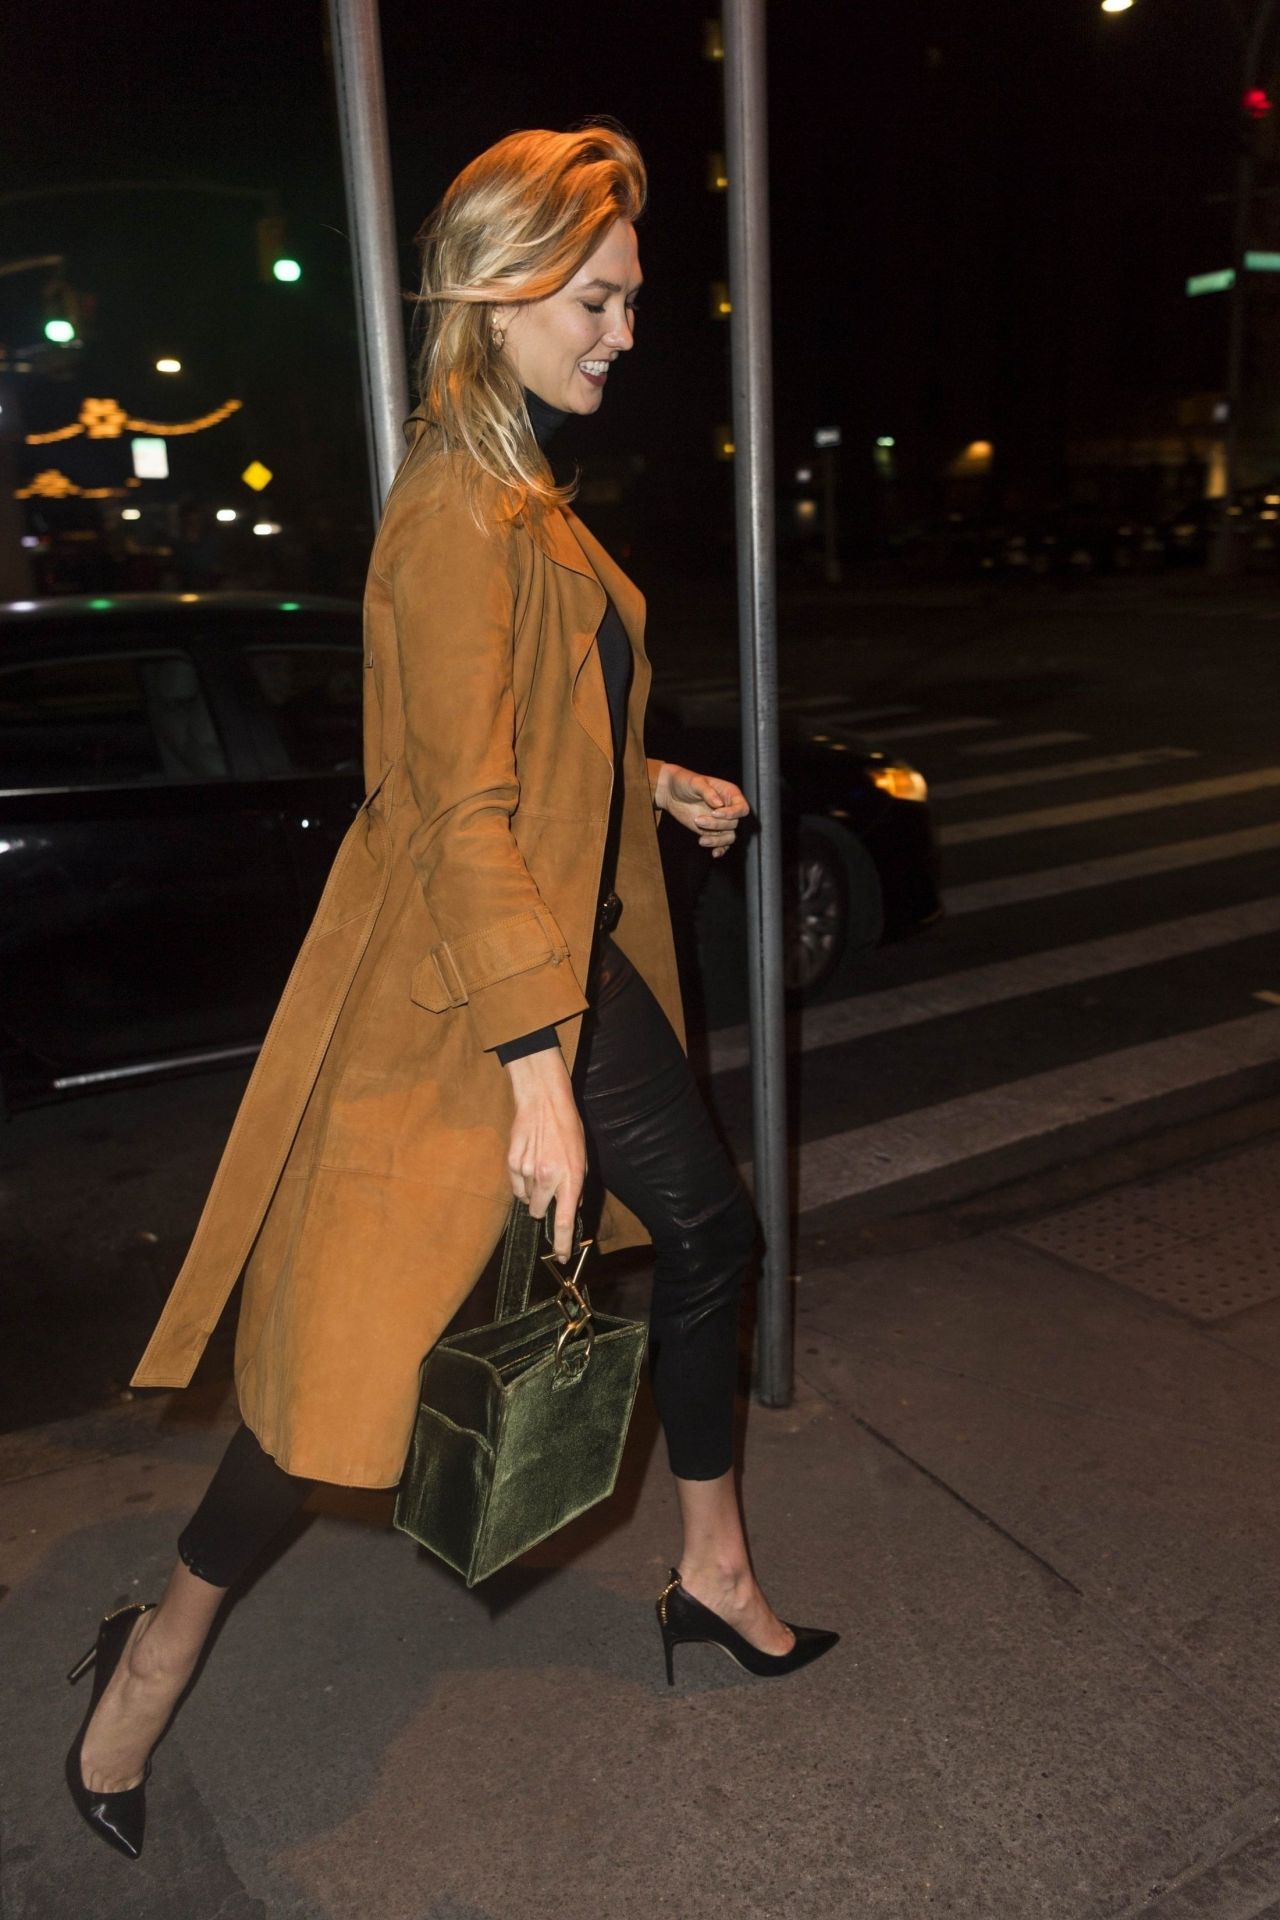 Karlie Kloss Night Out Style 02/05/20191280 x 1920